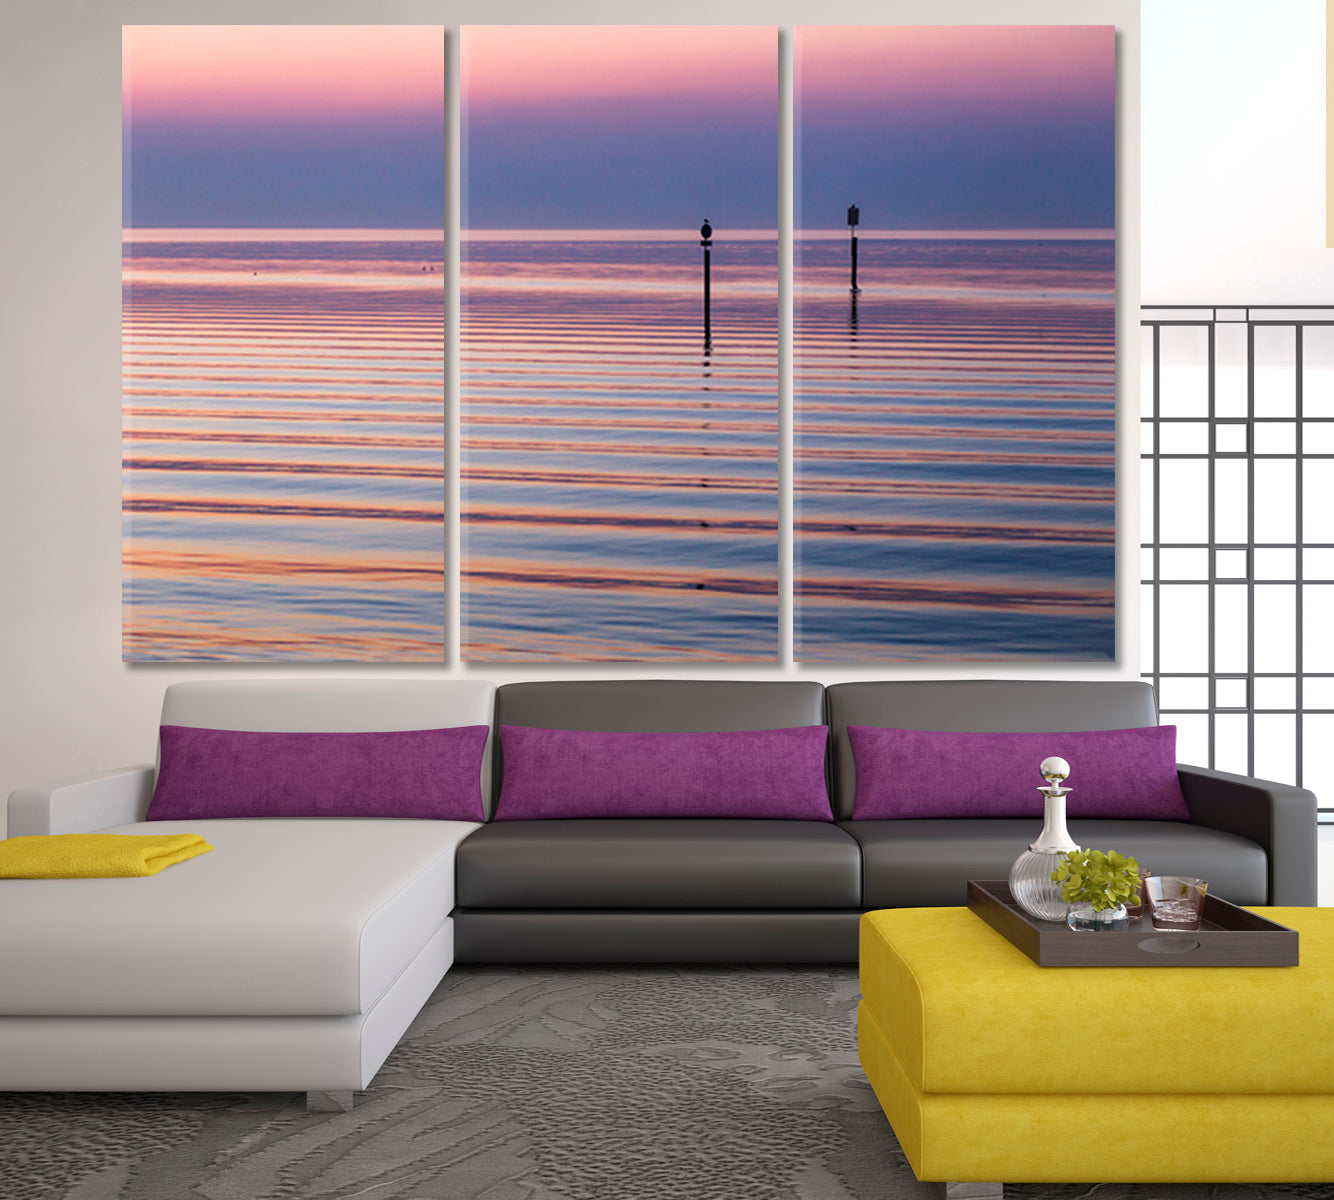 Incredible Play of Purple Colorful Sunrise Sky Panorama Bodensee Lake Germany Scenery Landscape Fine Art Print Artesty 3 panels 36" x 24" 